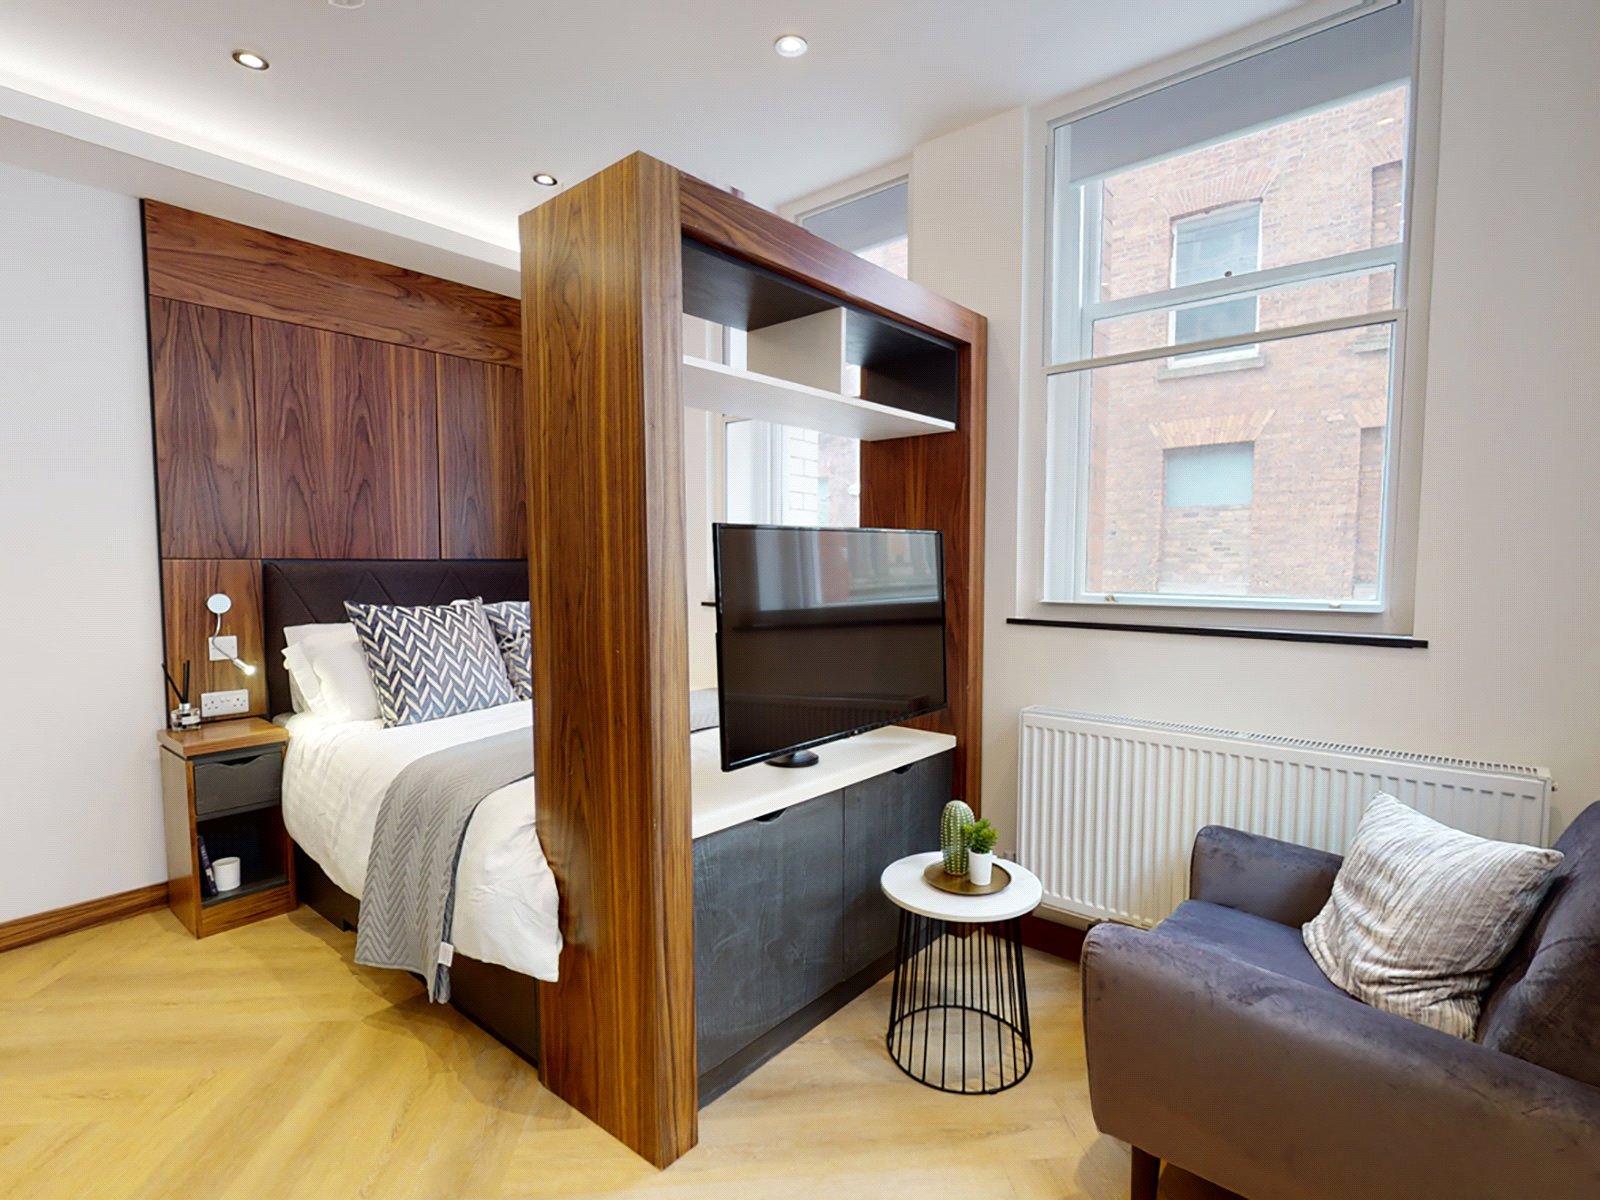 0 bed apartment for rent in Manchester. From YPP - Sheffield